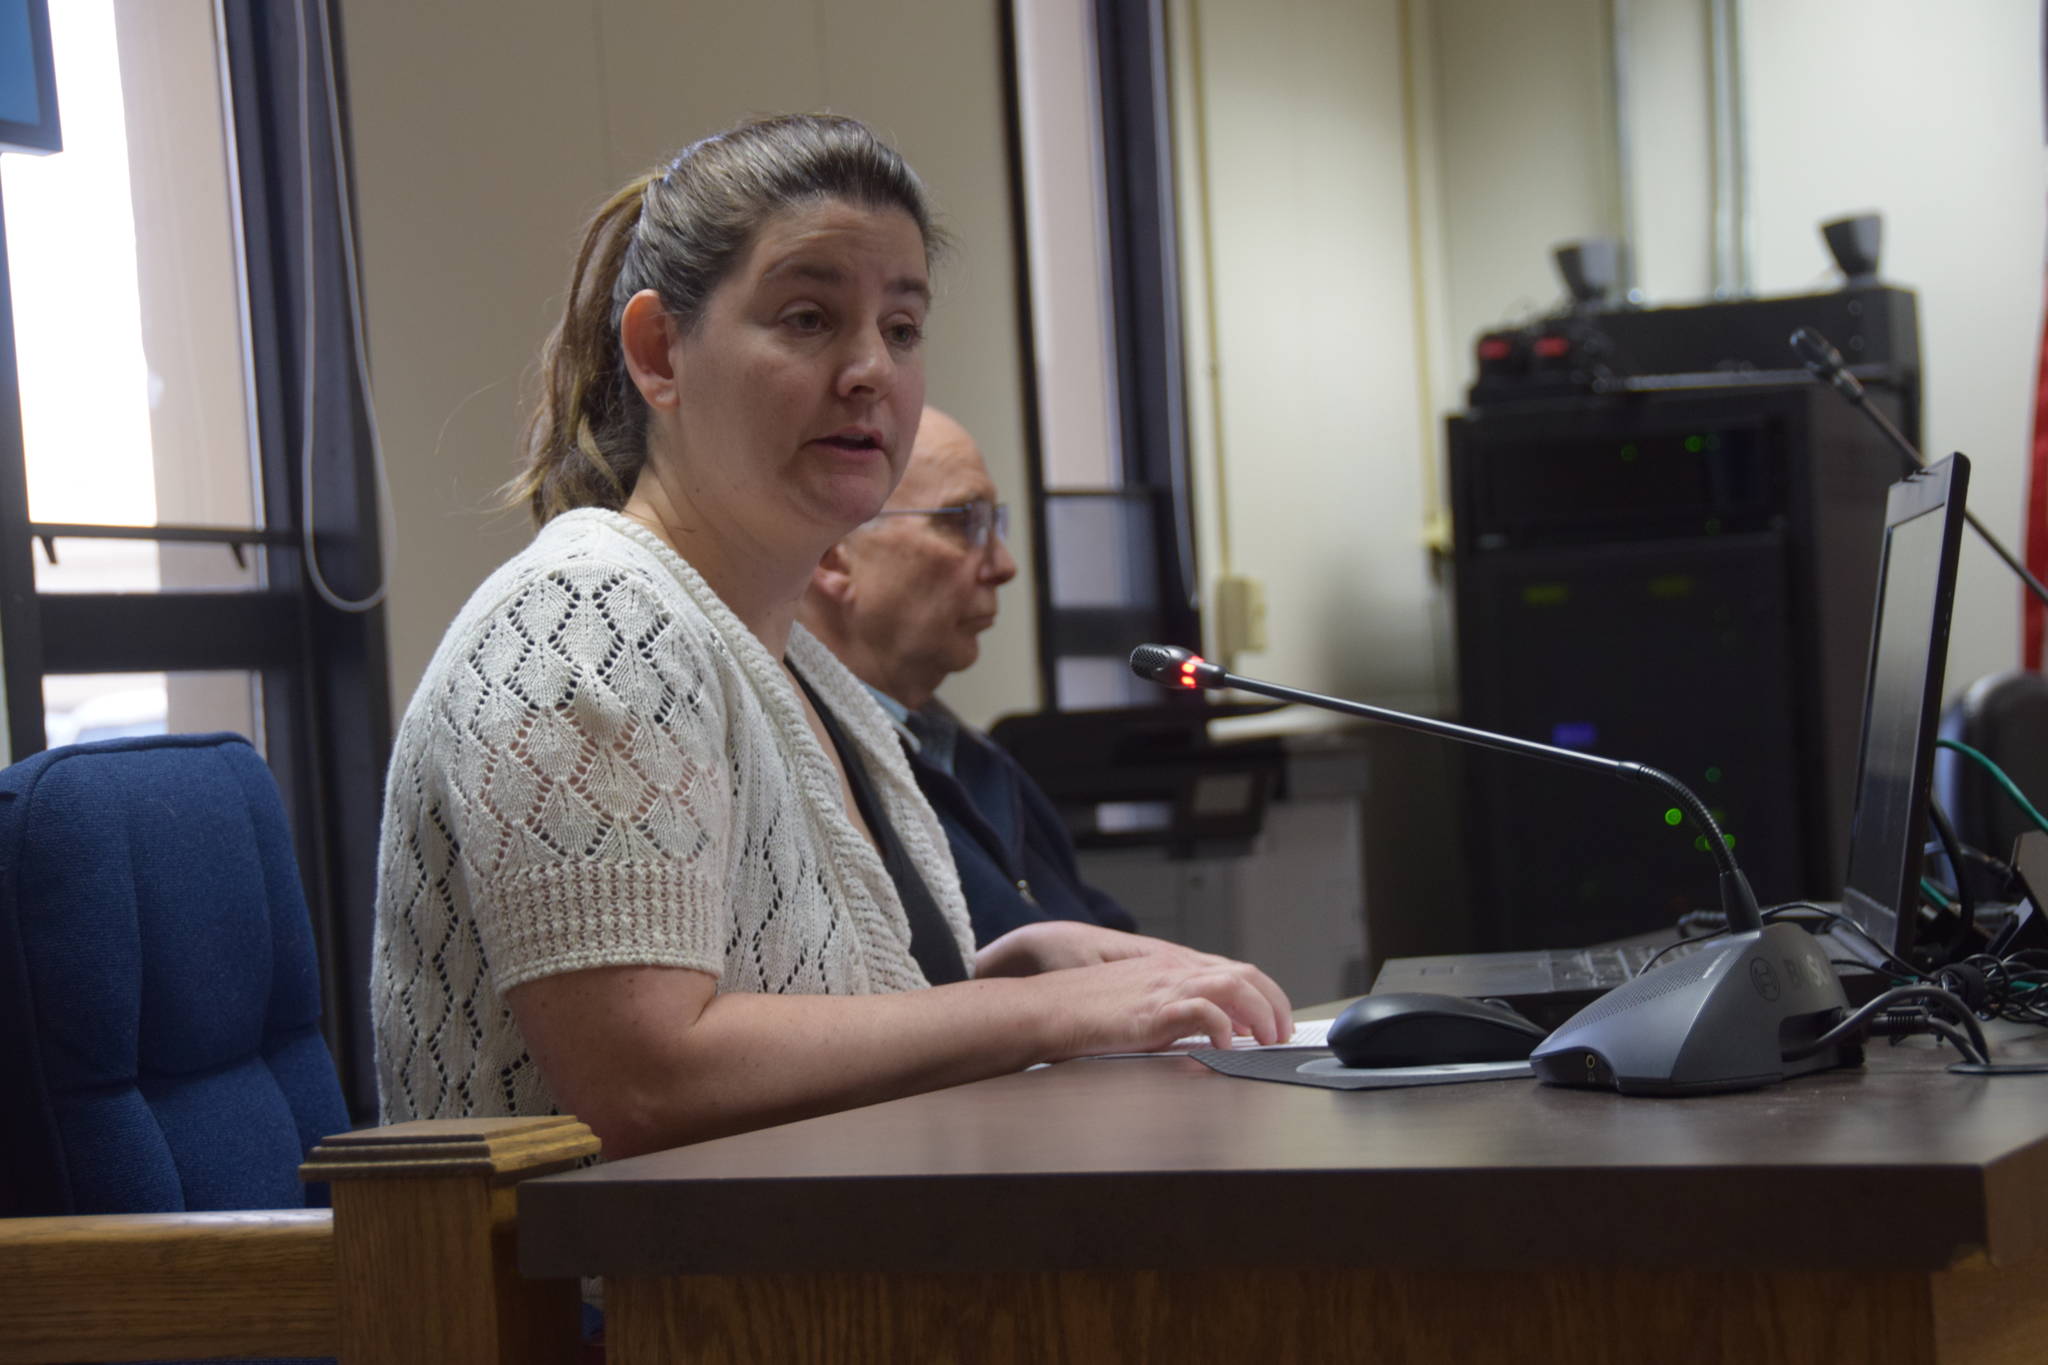 Rebecca Carnell, Director of Nursing and Clinical Services at 1st Choice Home Health Care, gives a presentation to the Kenai Peninsula Borough Assembly on April 2, 2019. (Photo by Brian Mazurek/Peninsula Clarion)